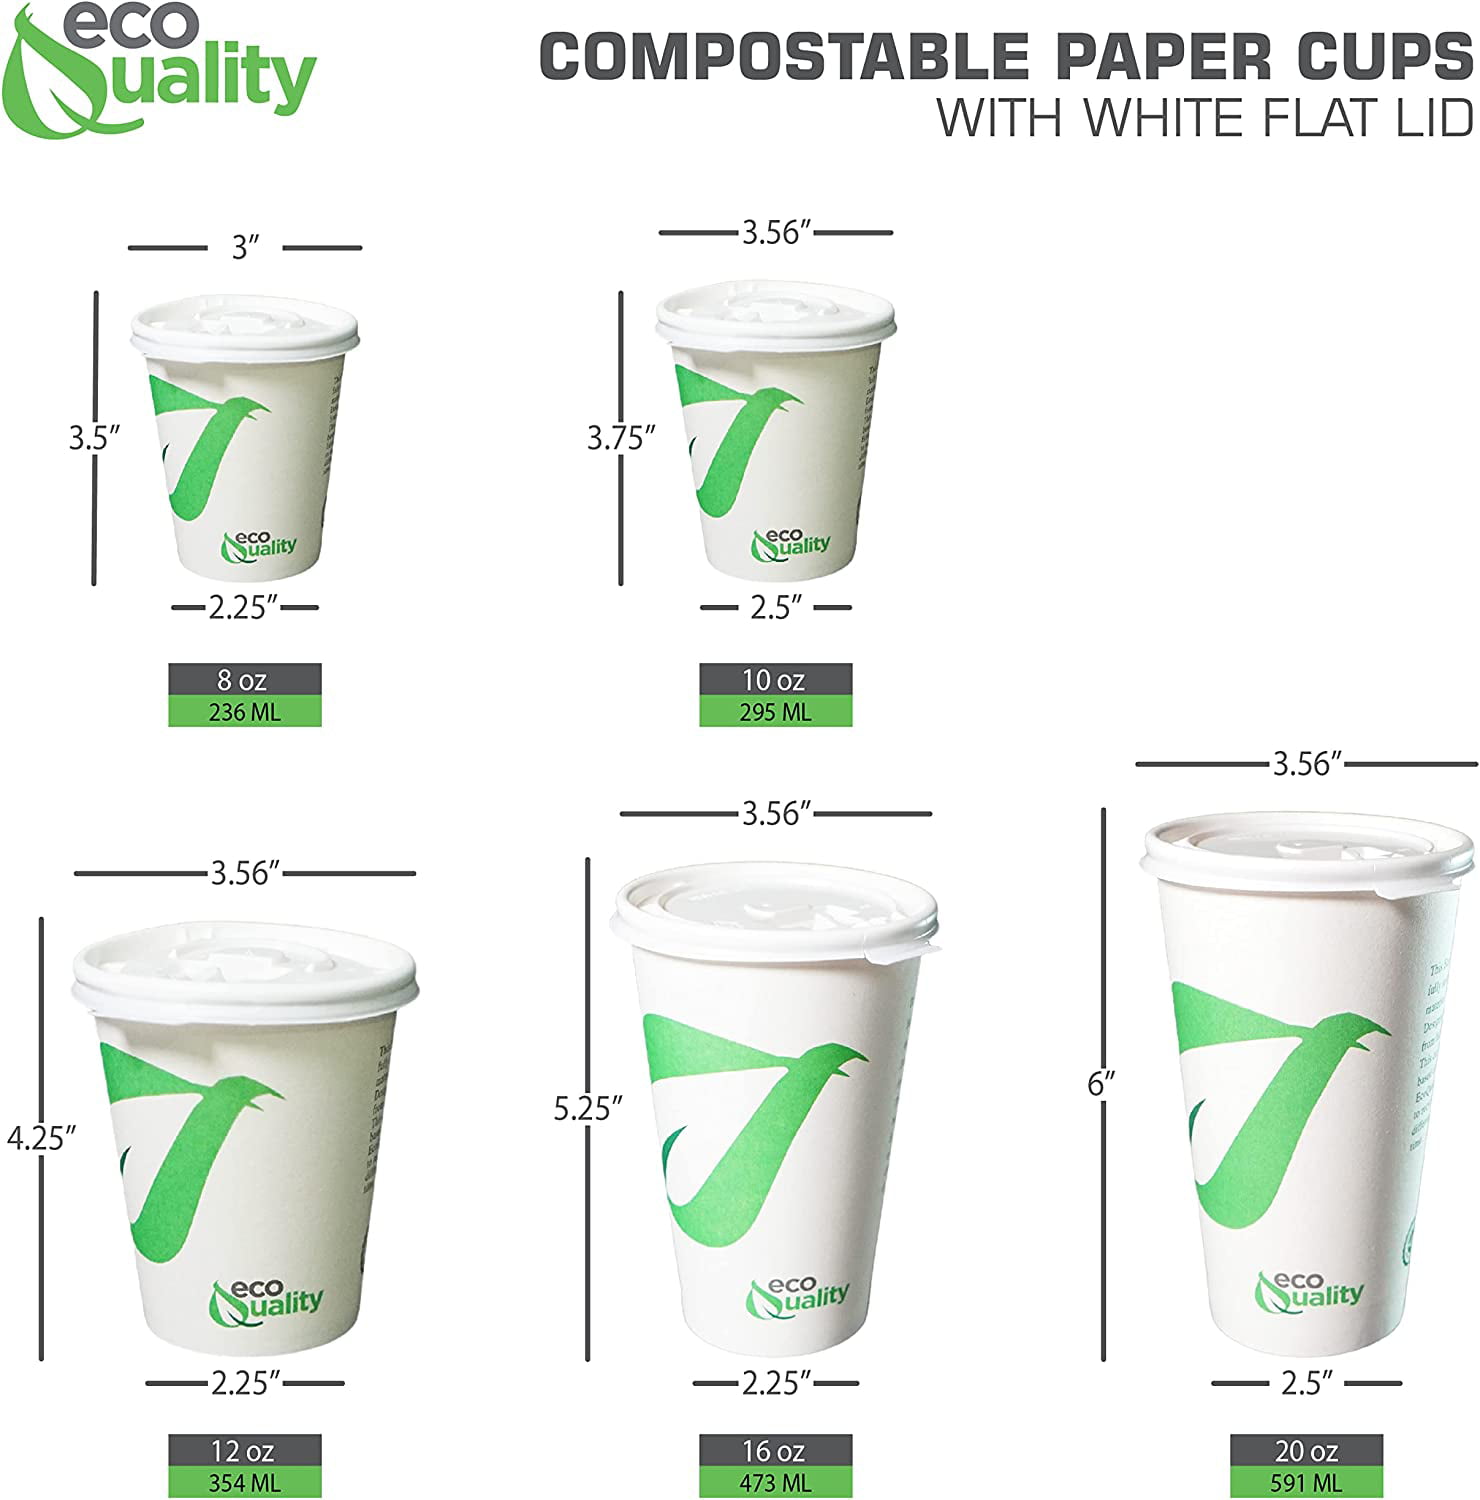 Hip 2 Be Square 22 Ounce Paper Coffee Cups, 500 Leakproof Reusable Coffee Cups - Lids Sold Separately, Double PE lining, Paper Disposable Cups, Hot 